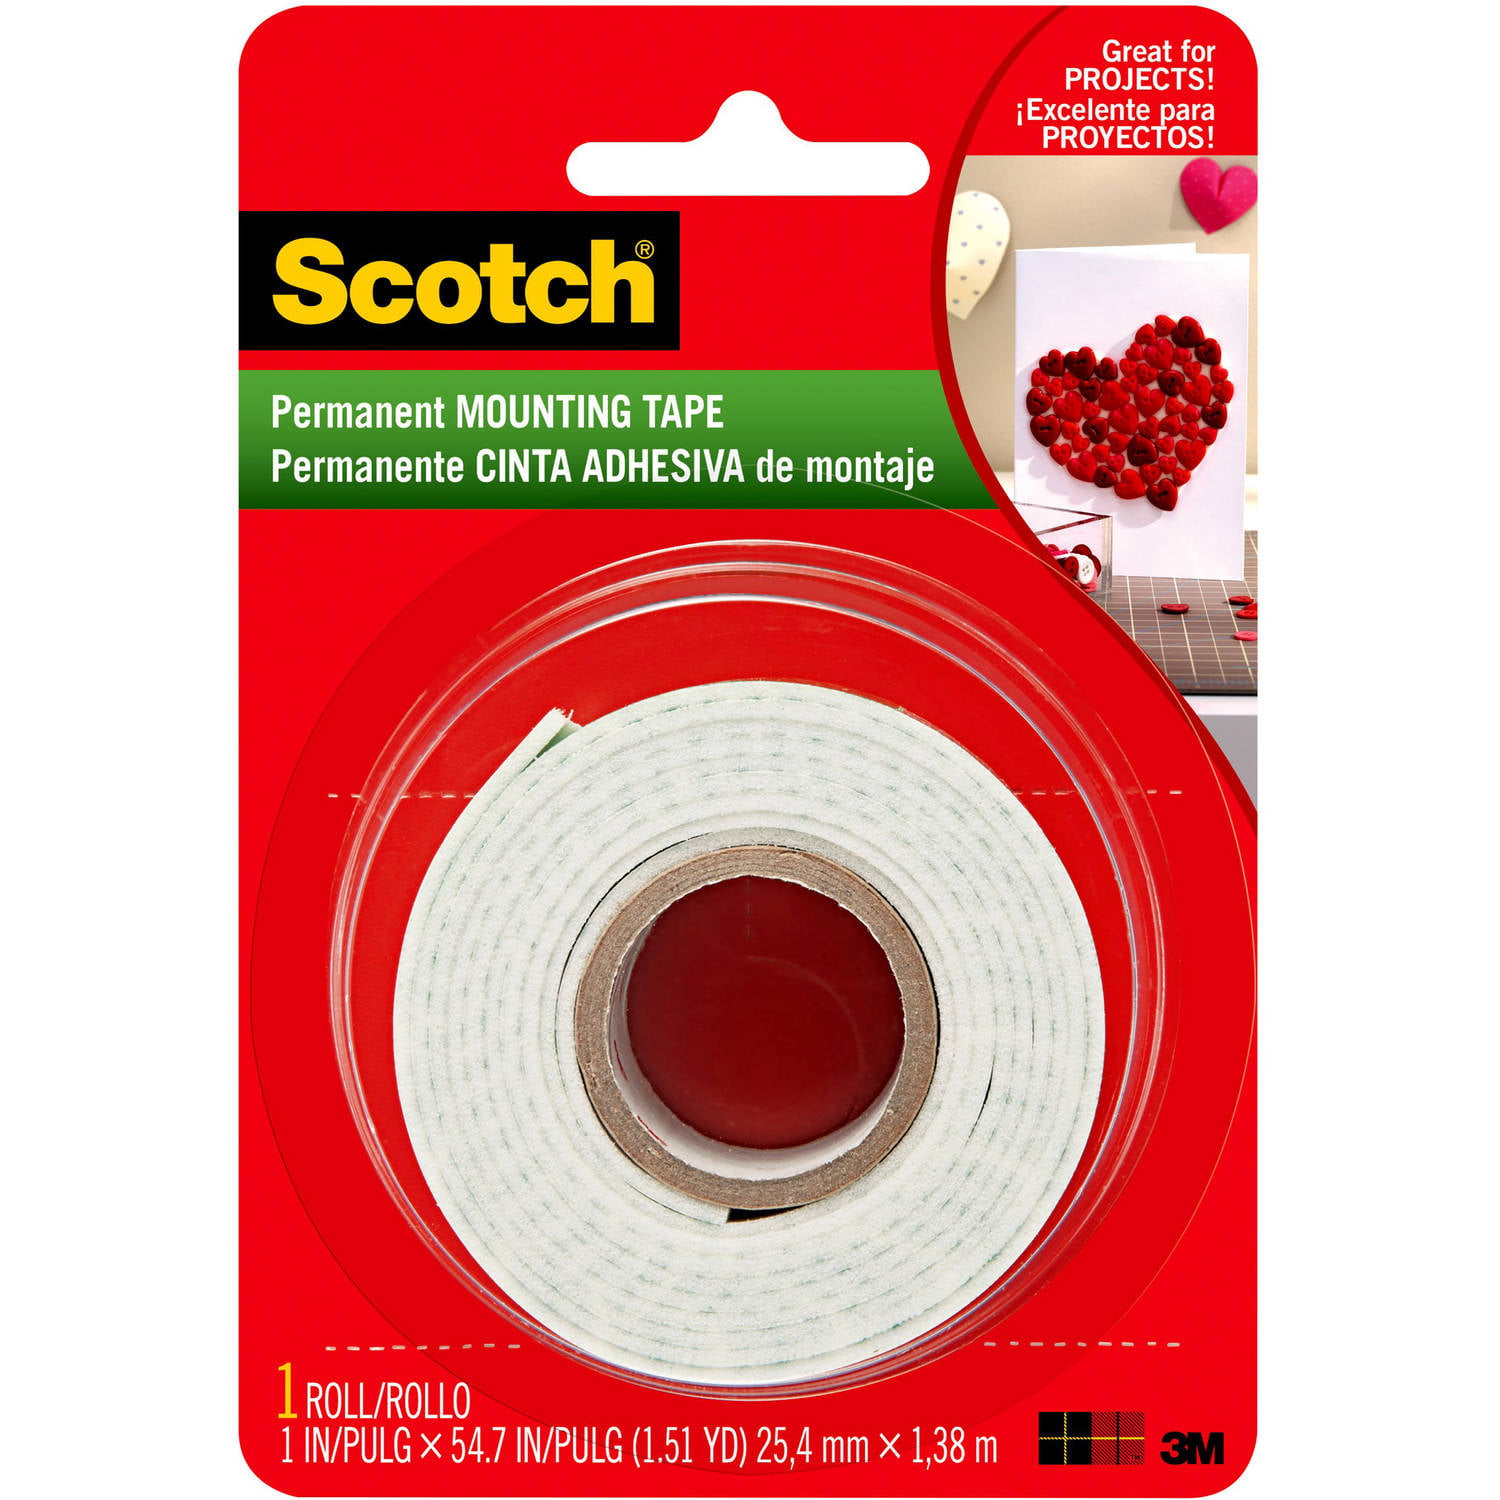 Scotch Indoor Permanent Mounting Tape, 1 in x 54.7 in, 1 Roll